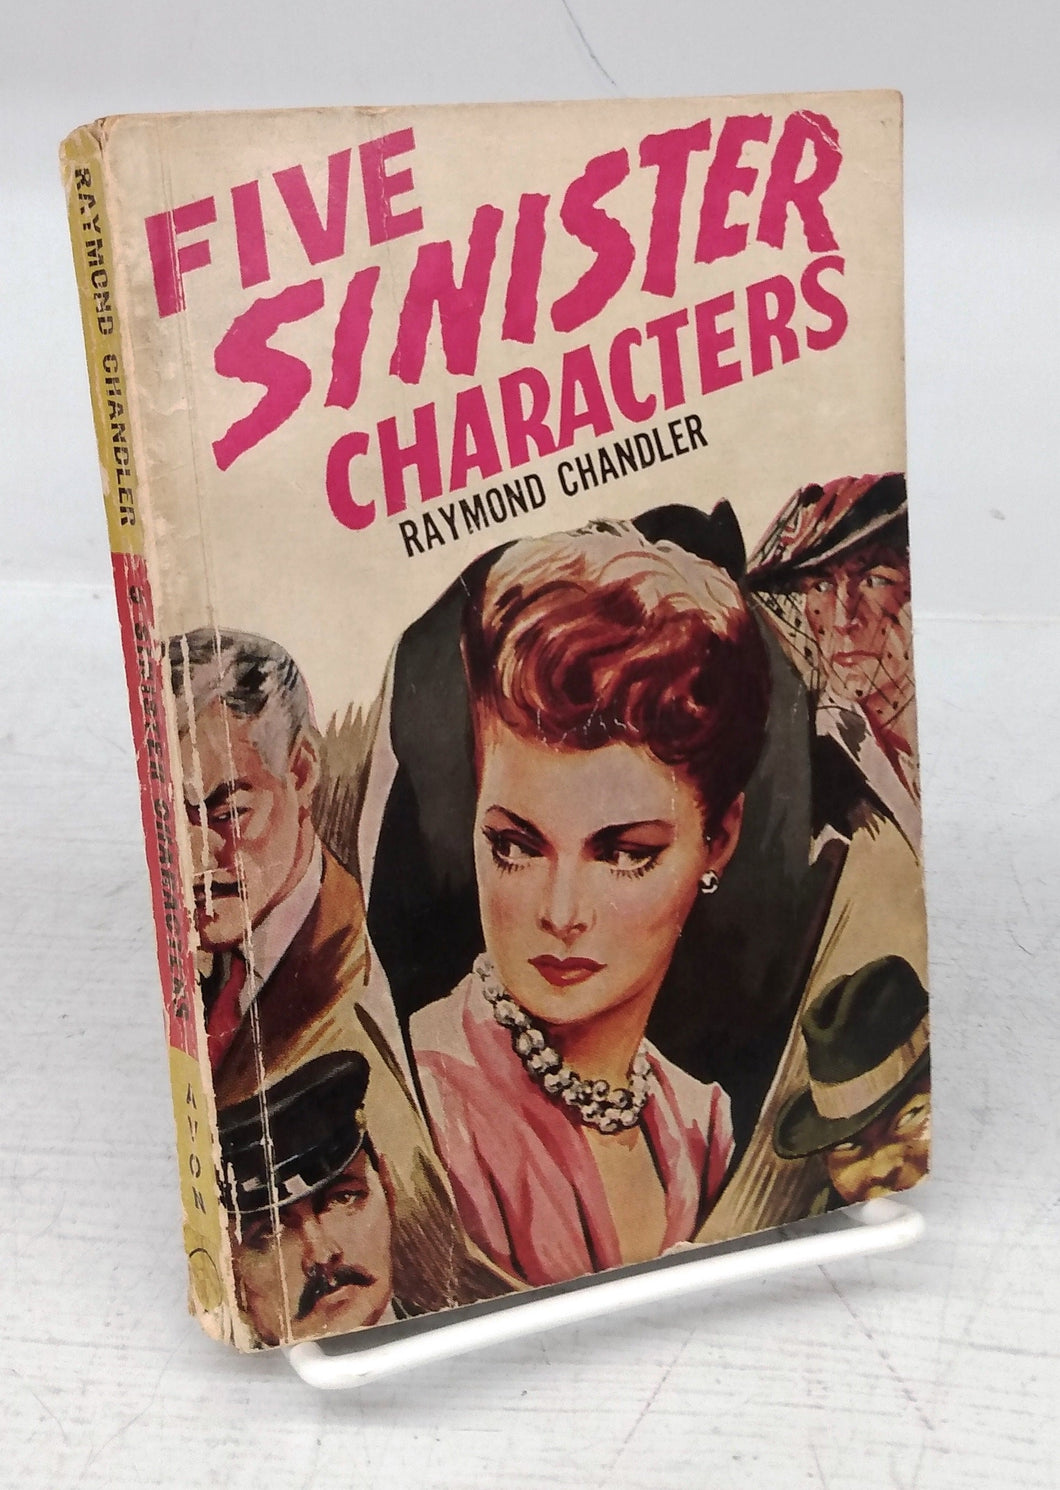 Five Sinister Characters